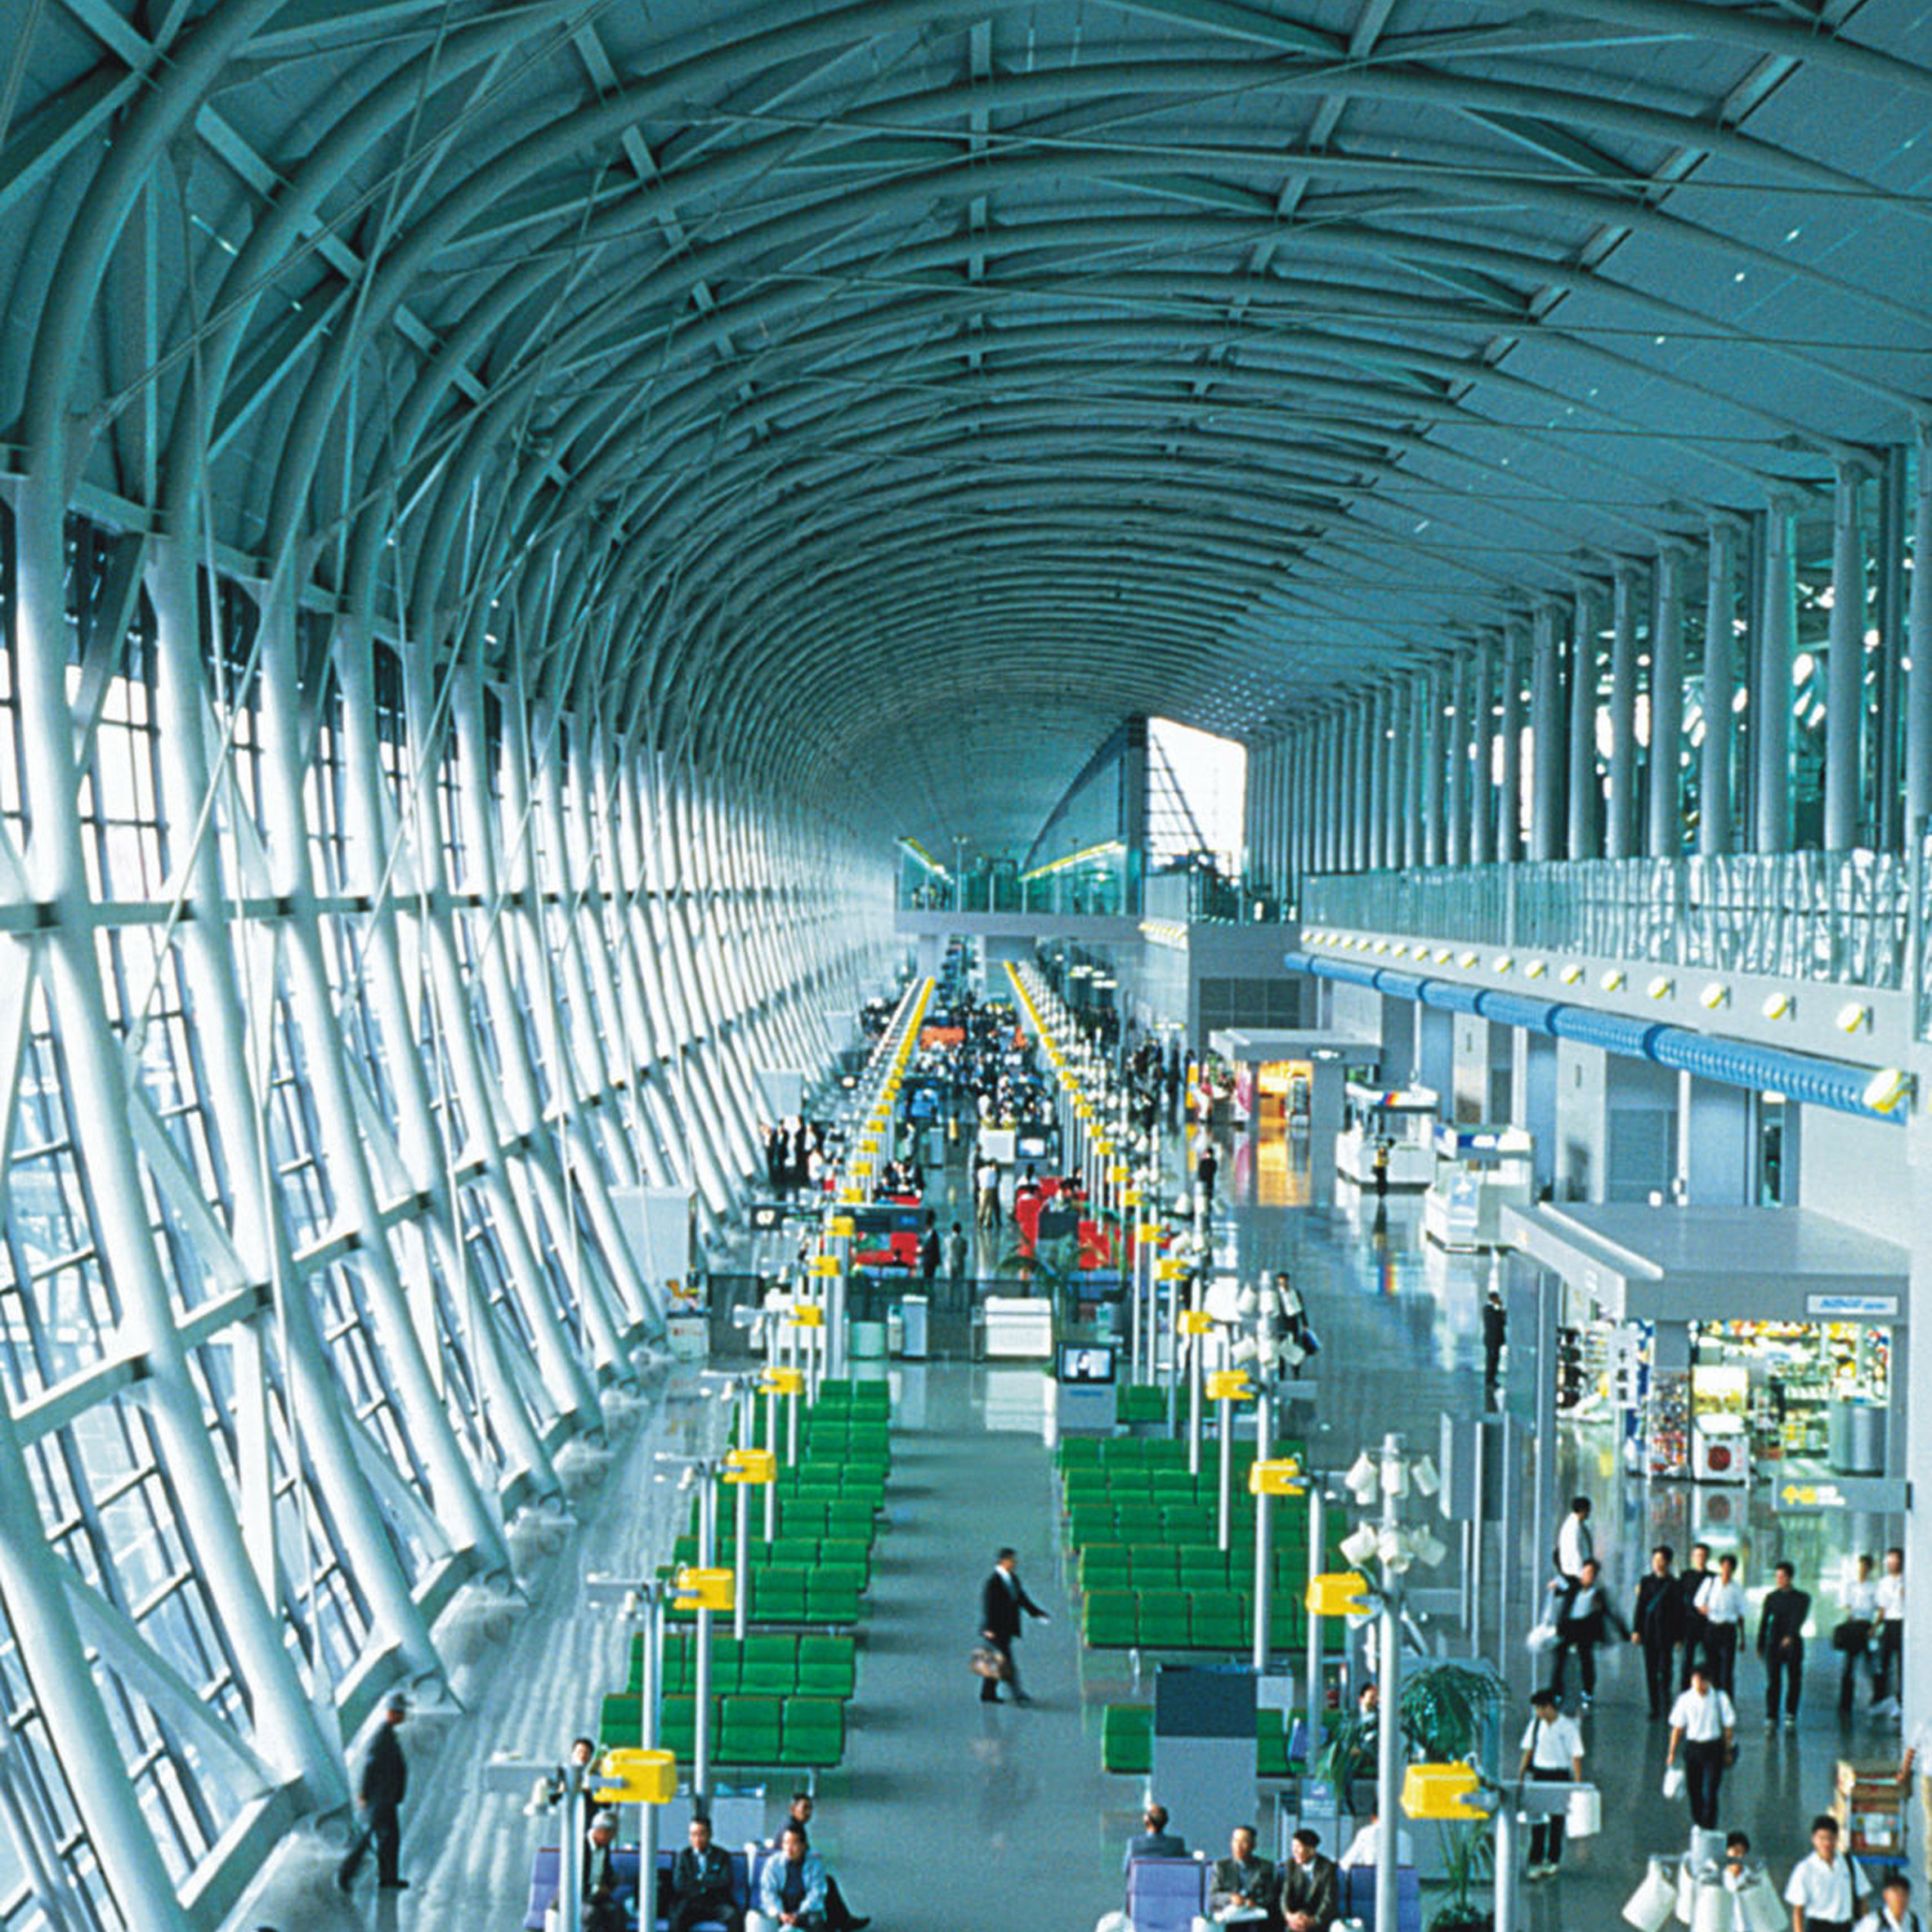 High-tech architecture from A to Z: Kansai International Airport by Renzo Piano